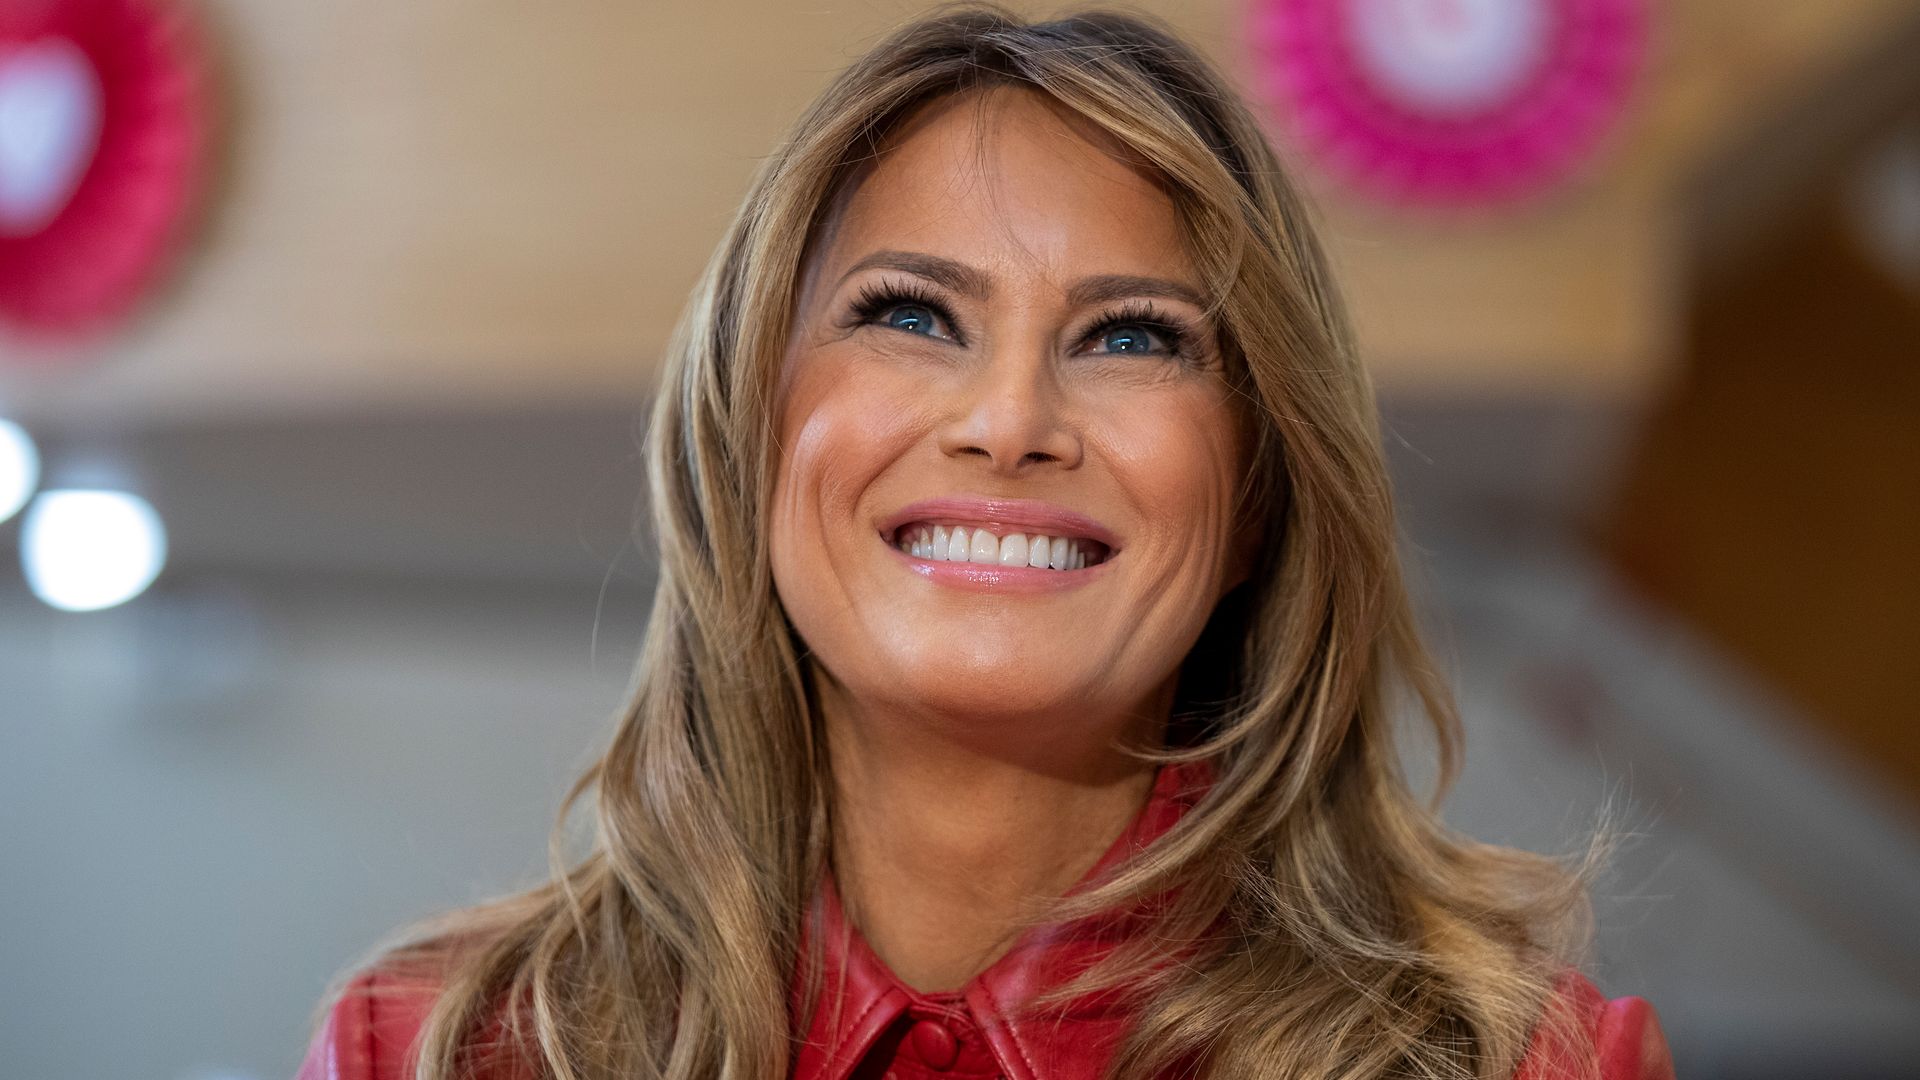 Melania Trump stuns in red at 'spectacular' fundraiser in New York City